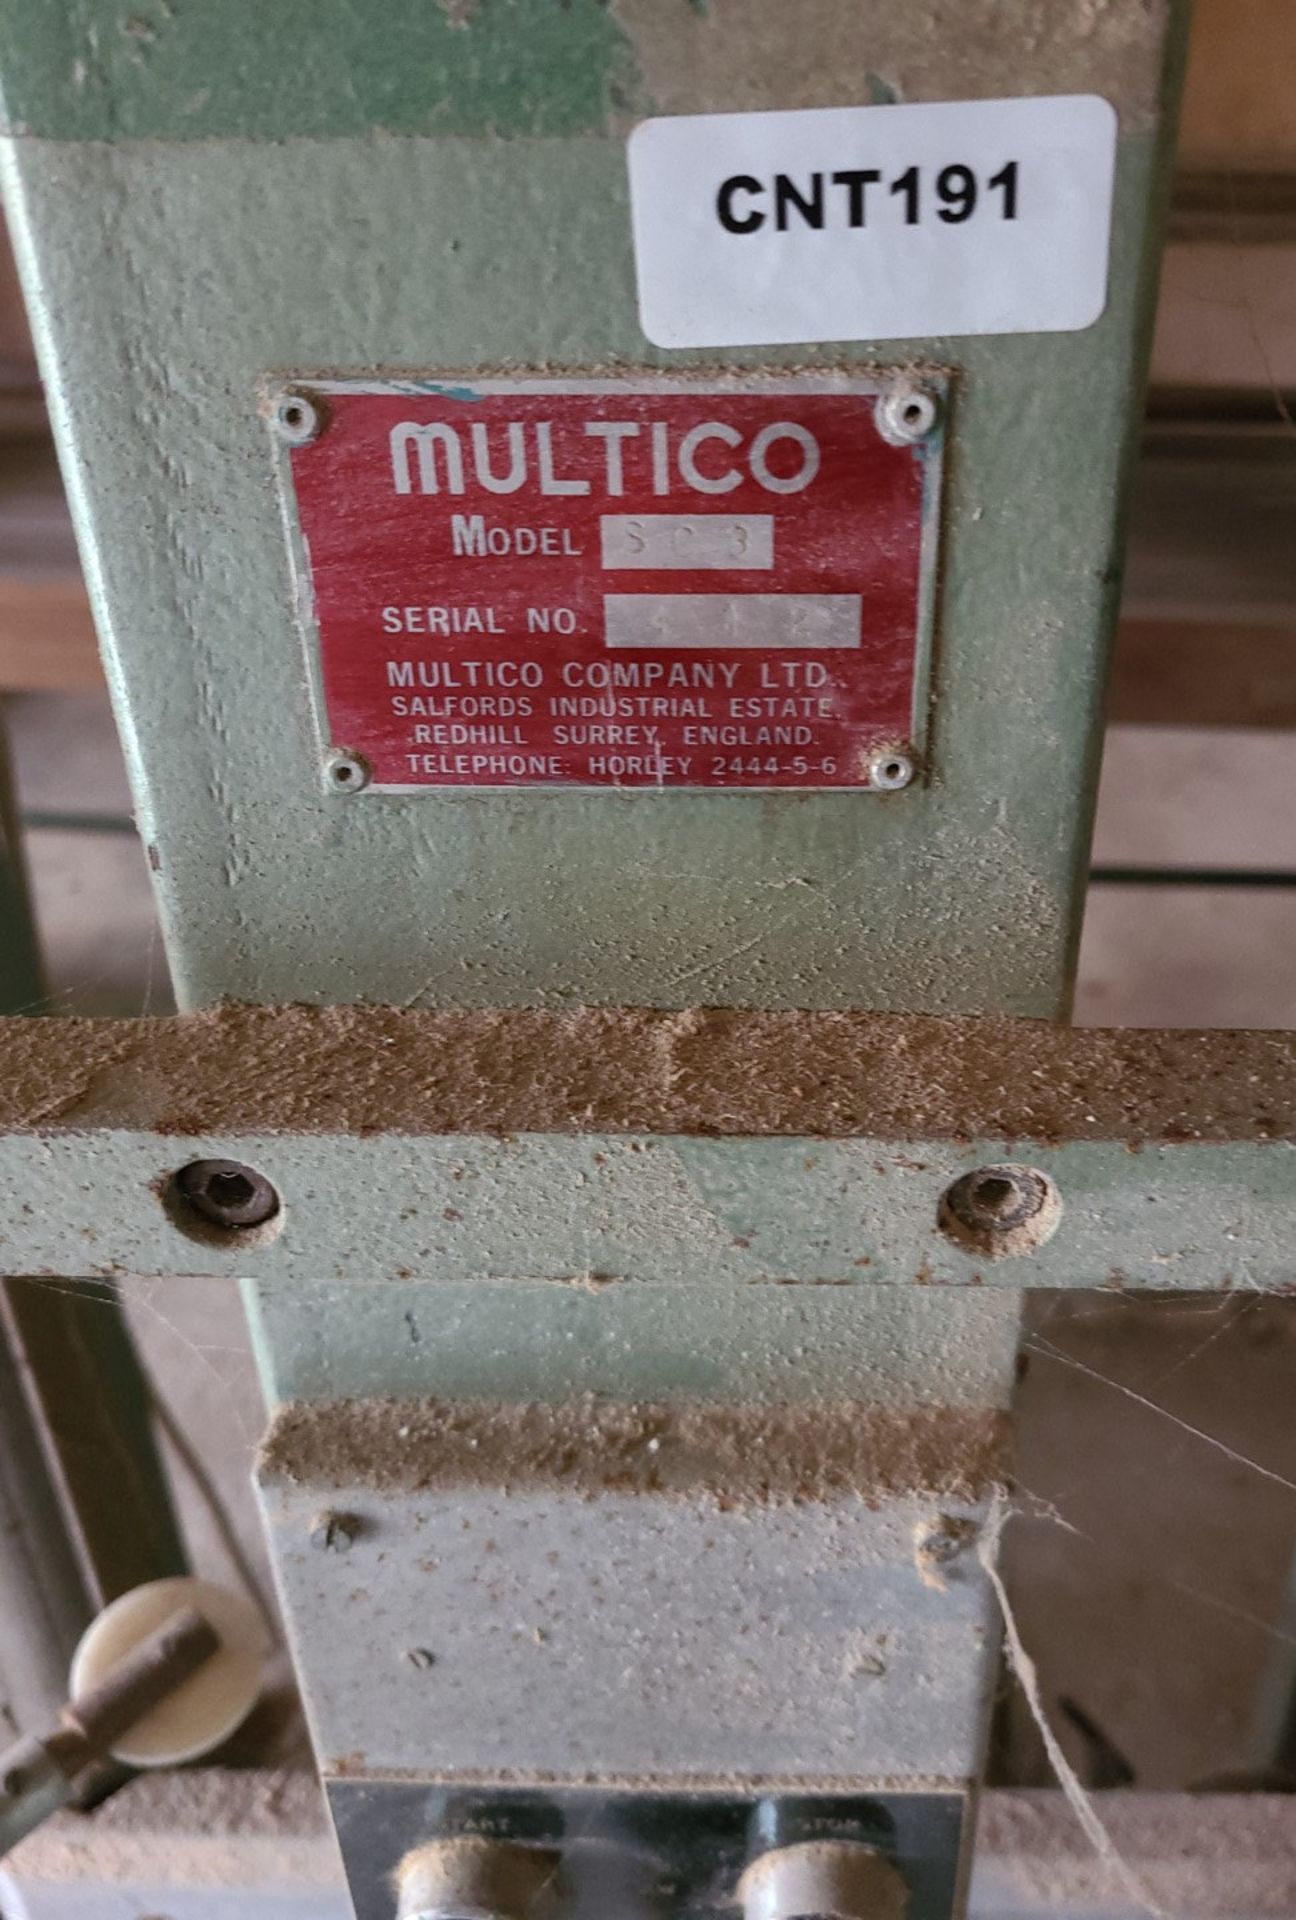 1 x Multico SC3 Wall Saw 2M X 2M X 1.8M - Ref: CNT191 - CL846 - Location: - Image 4 of 11